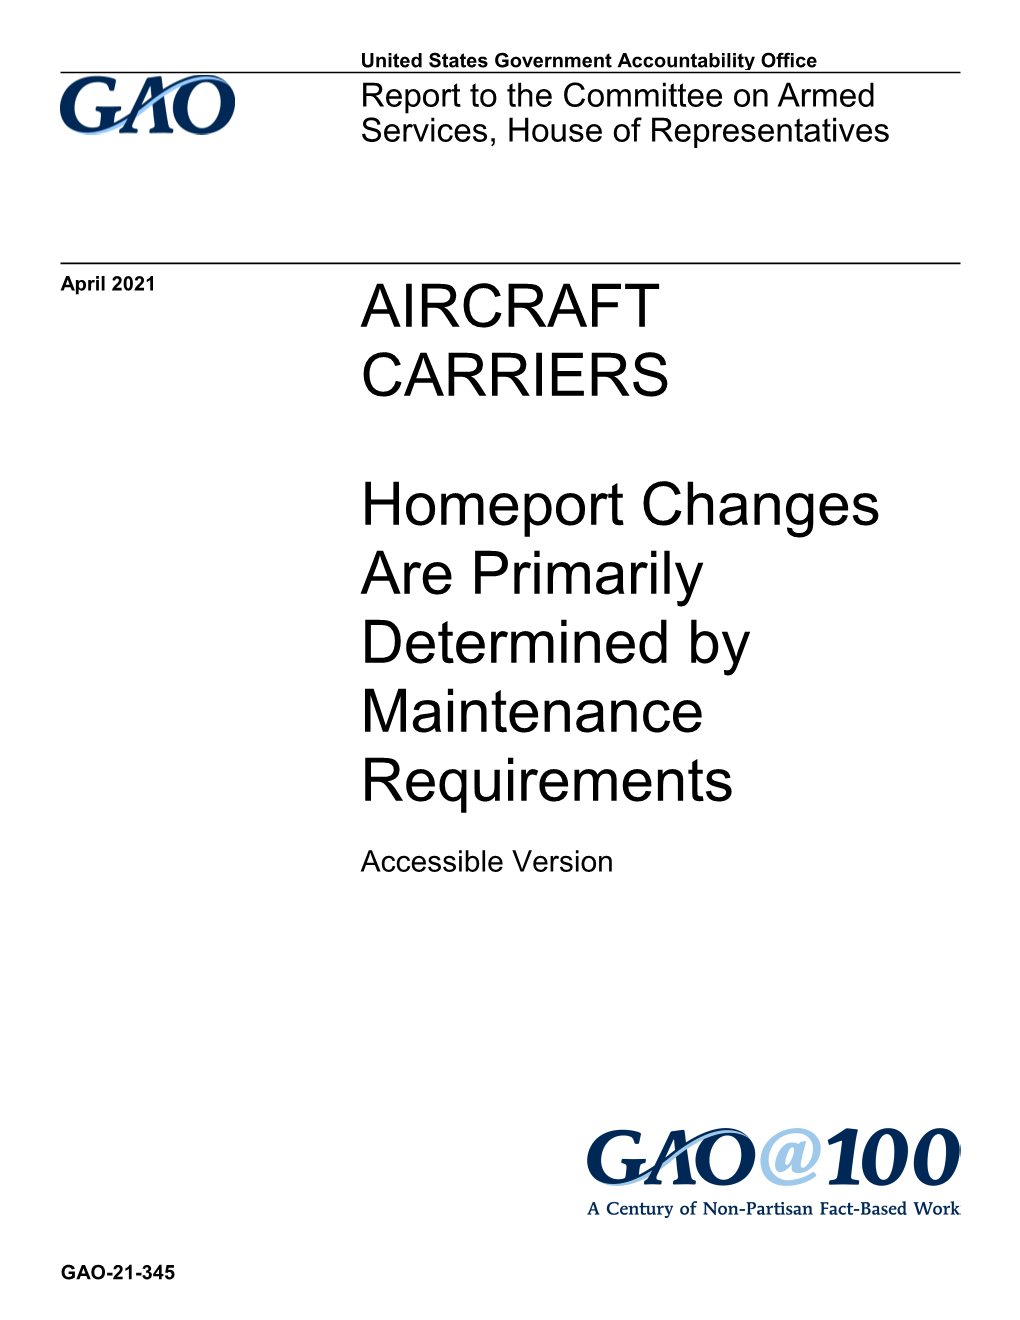 GAO-21-345, Accessible Version, AIRCRAFT CARRIERS: Homeport